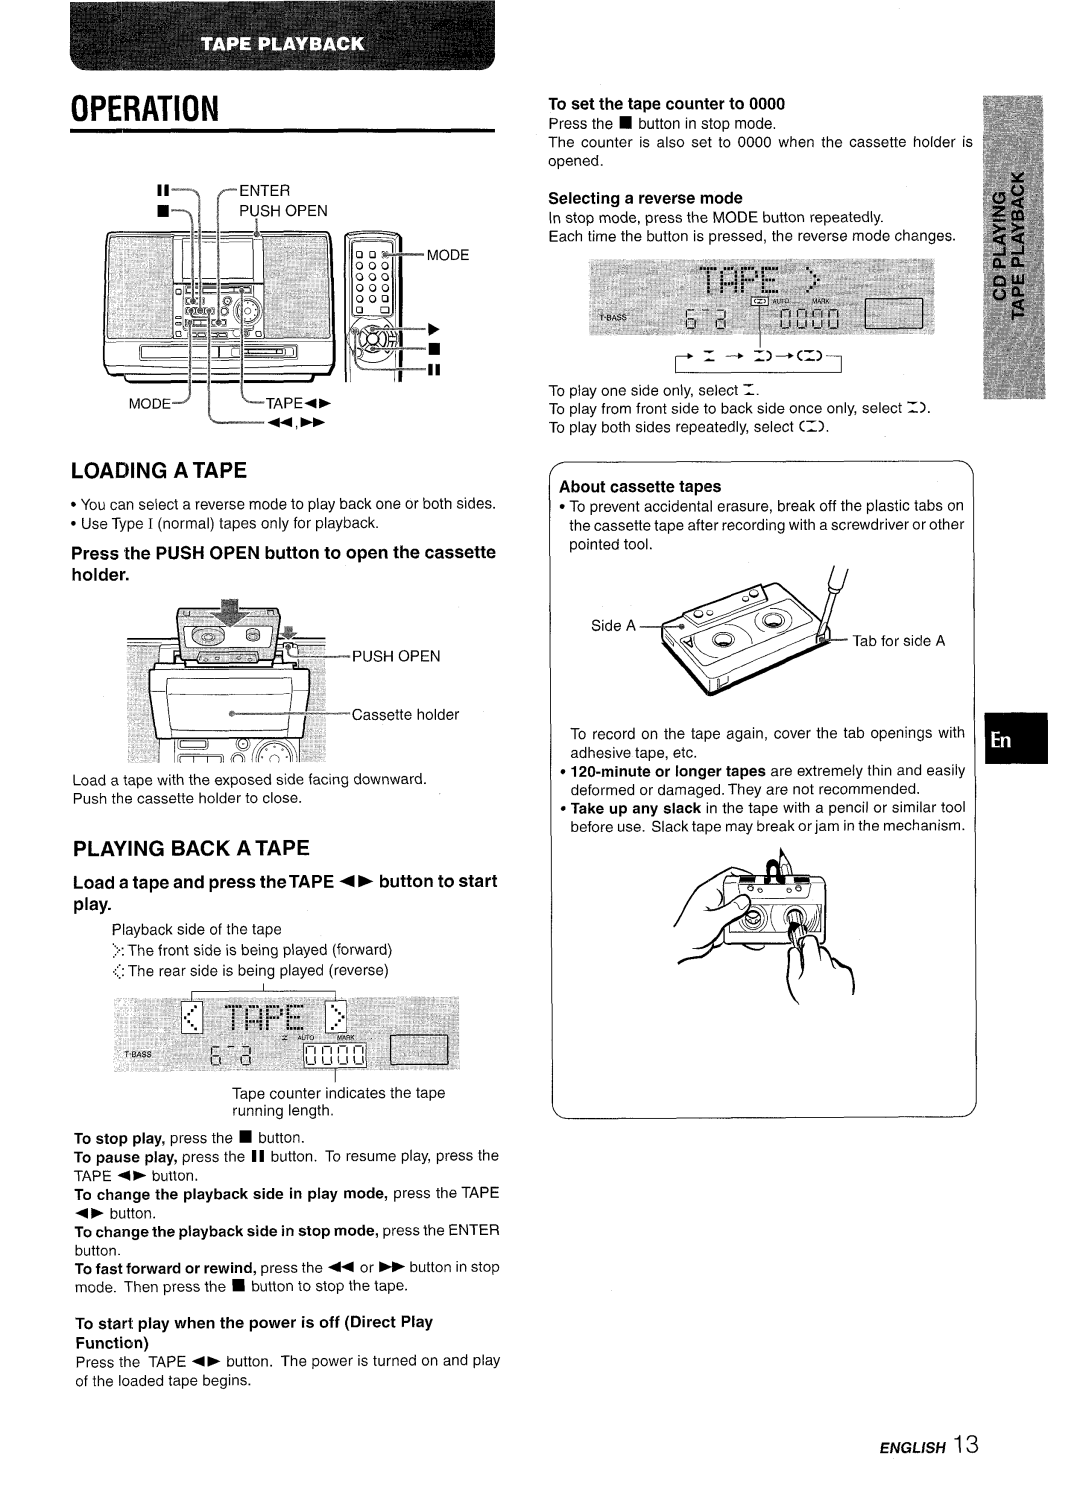 Aiwa CSD-MD50 manual ENGLISH13, Loading A Tape, Playing Back A Tape, Operation, r =-+=+=, Selecting a reverse mode 